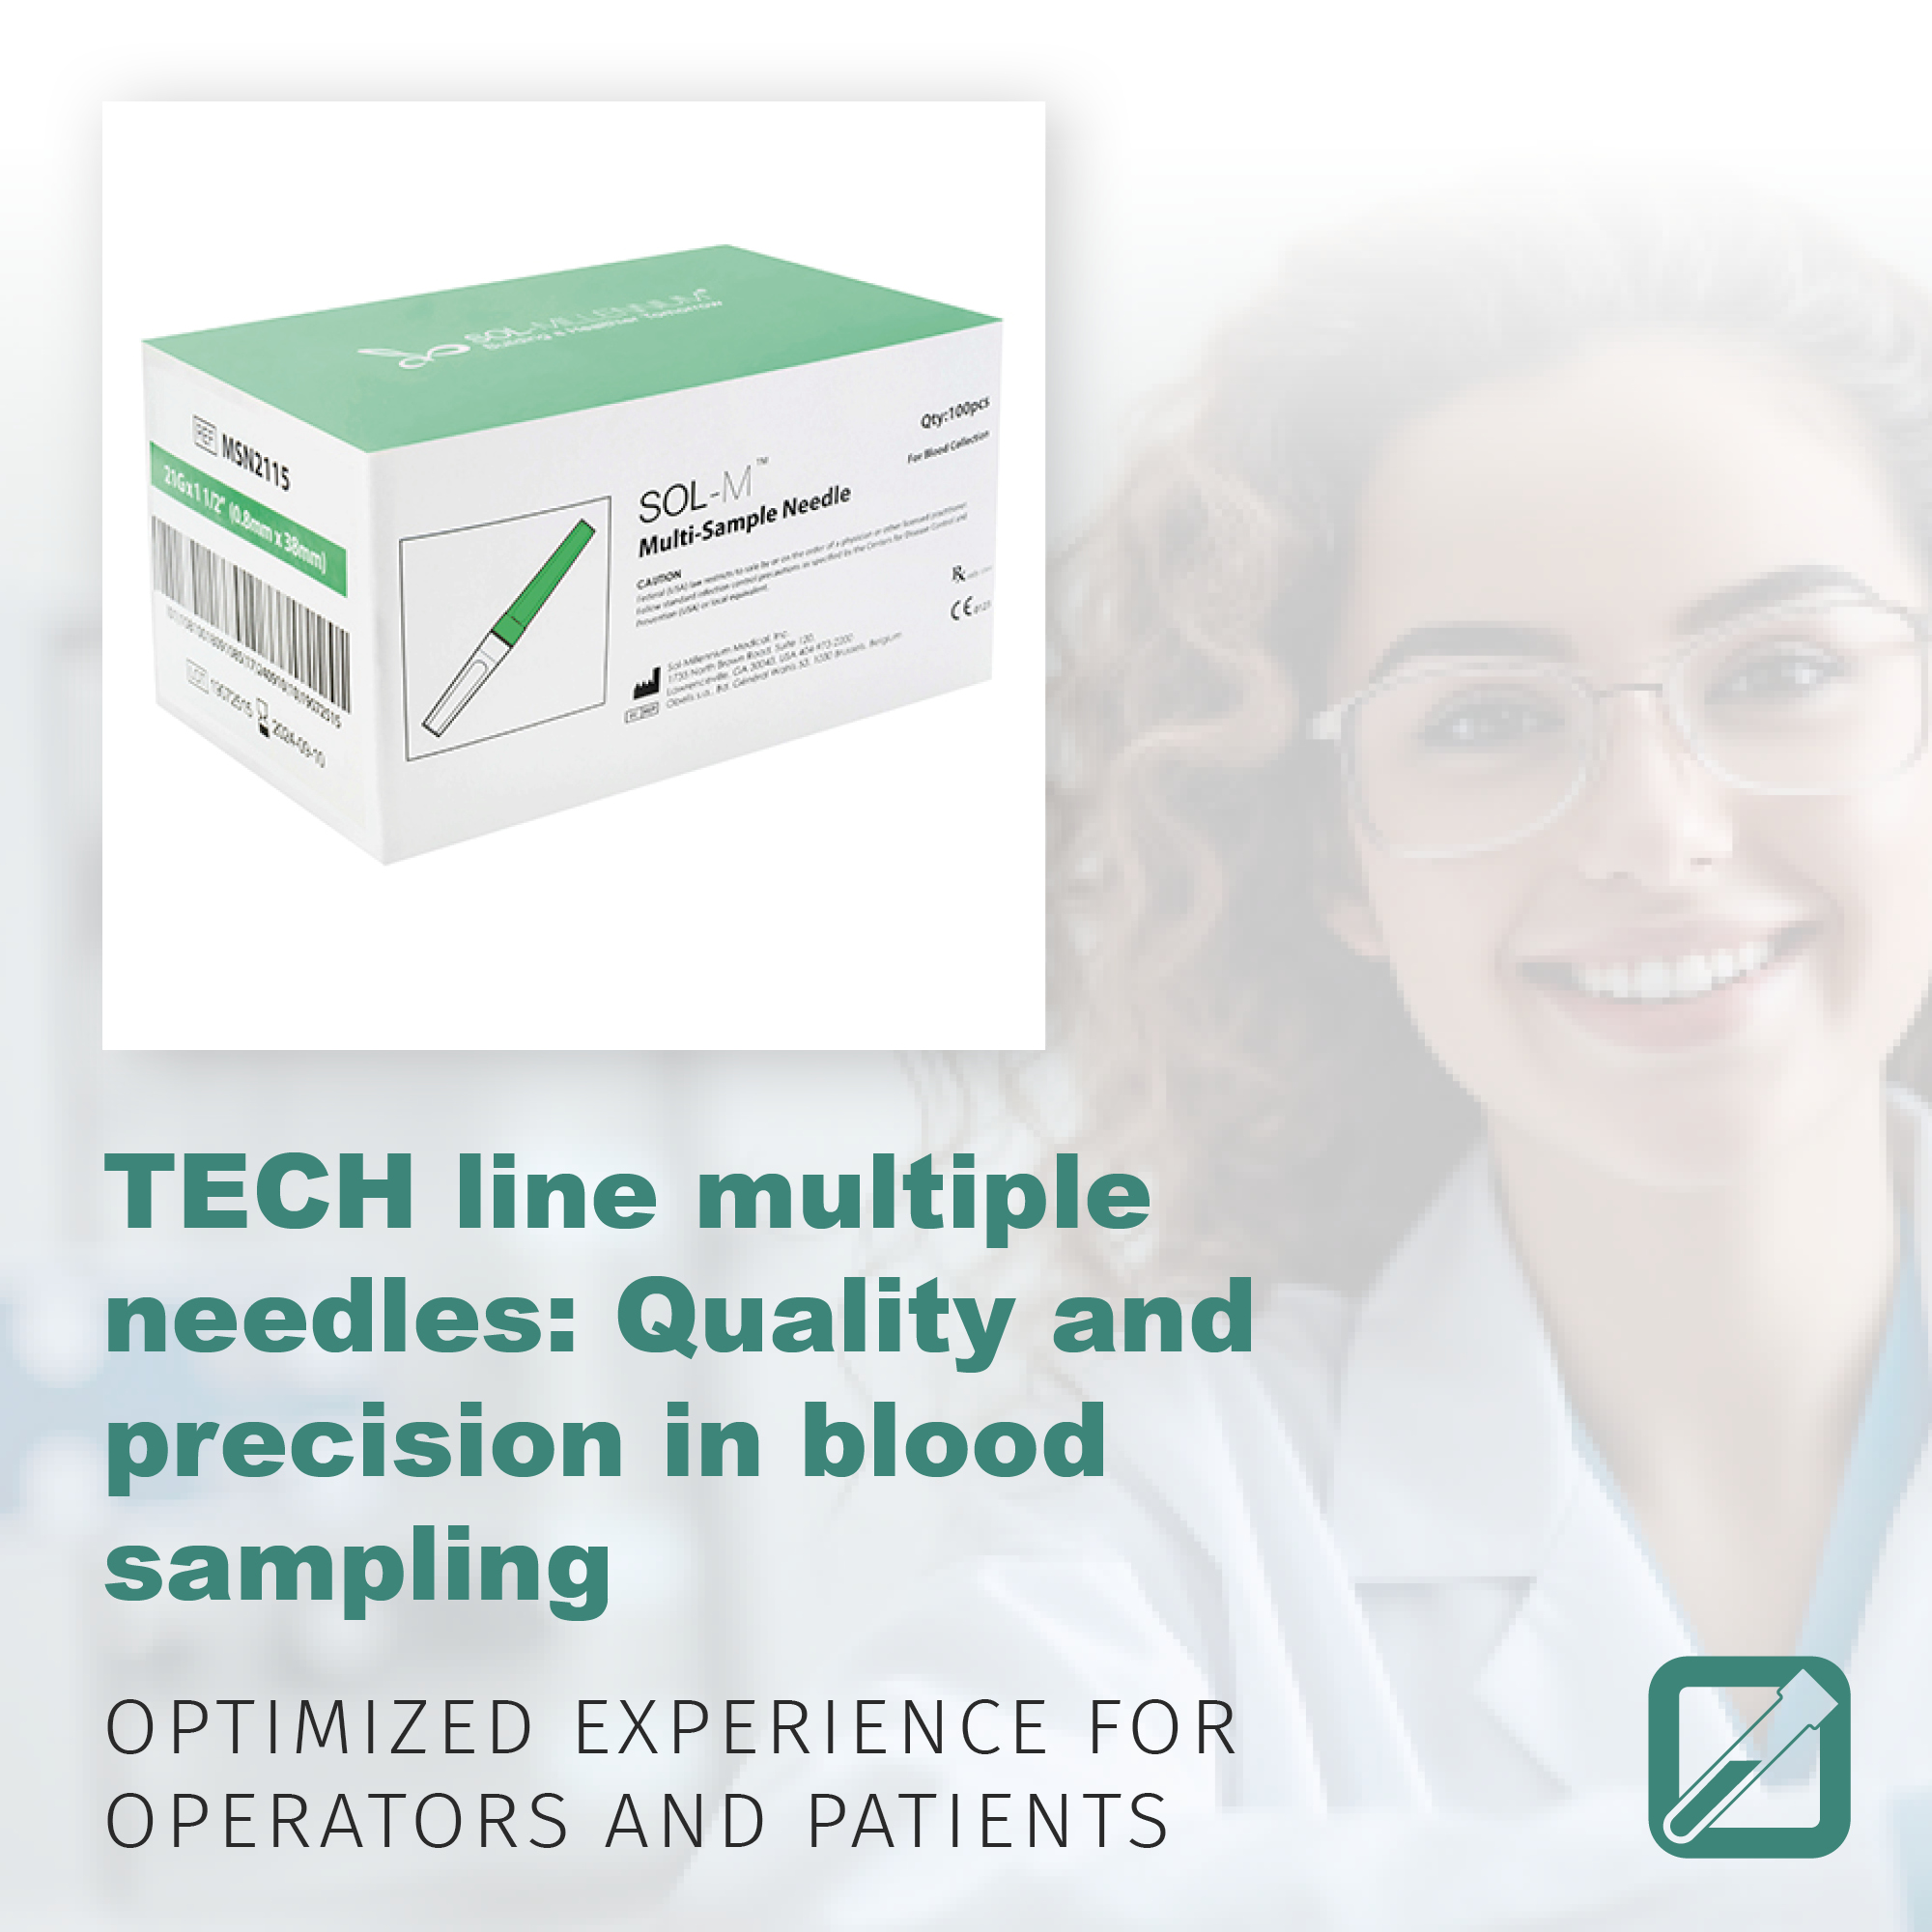 TECH line multiple needles: quality and precision in blood sampling